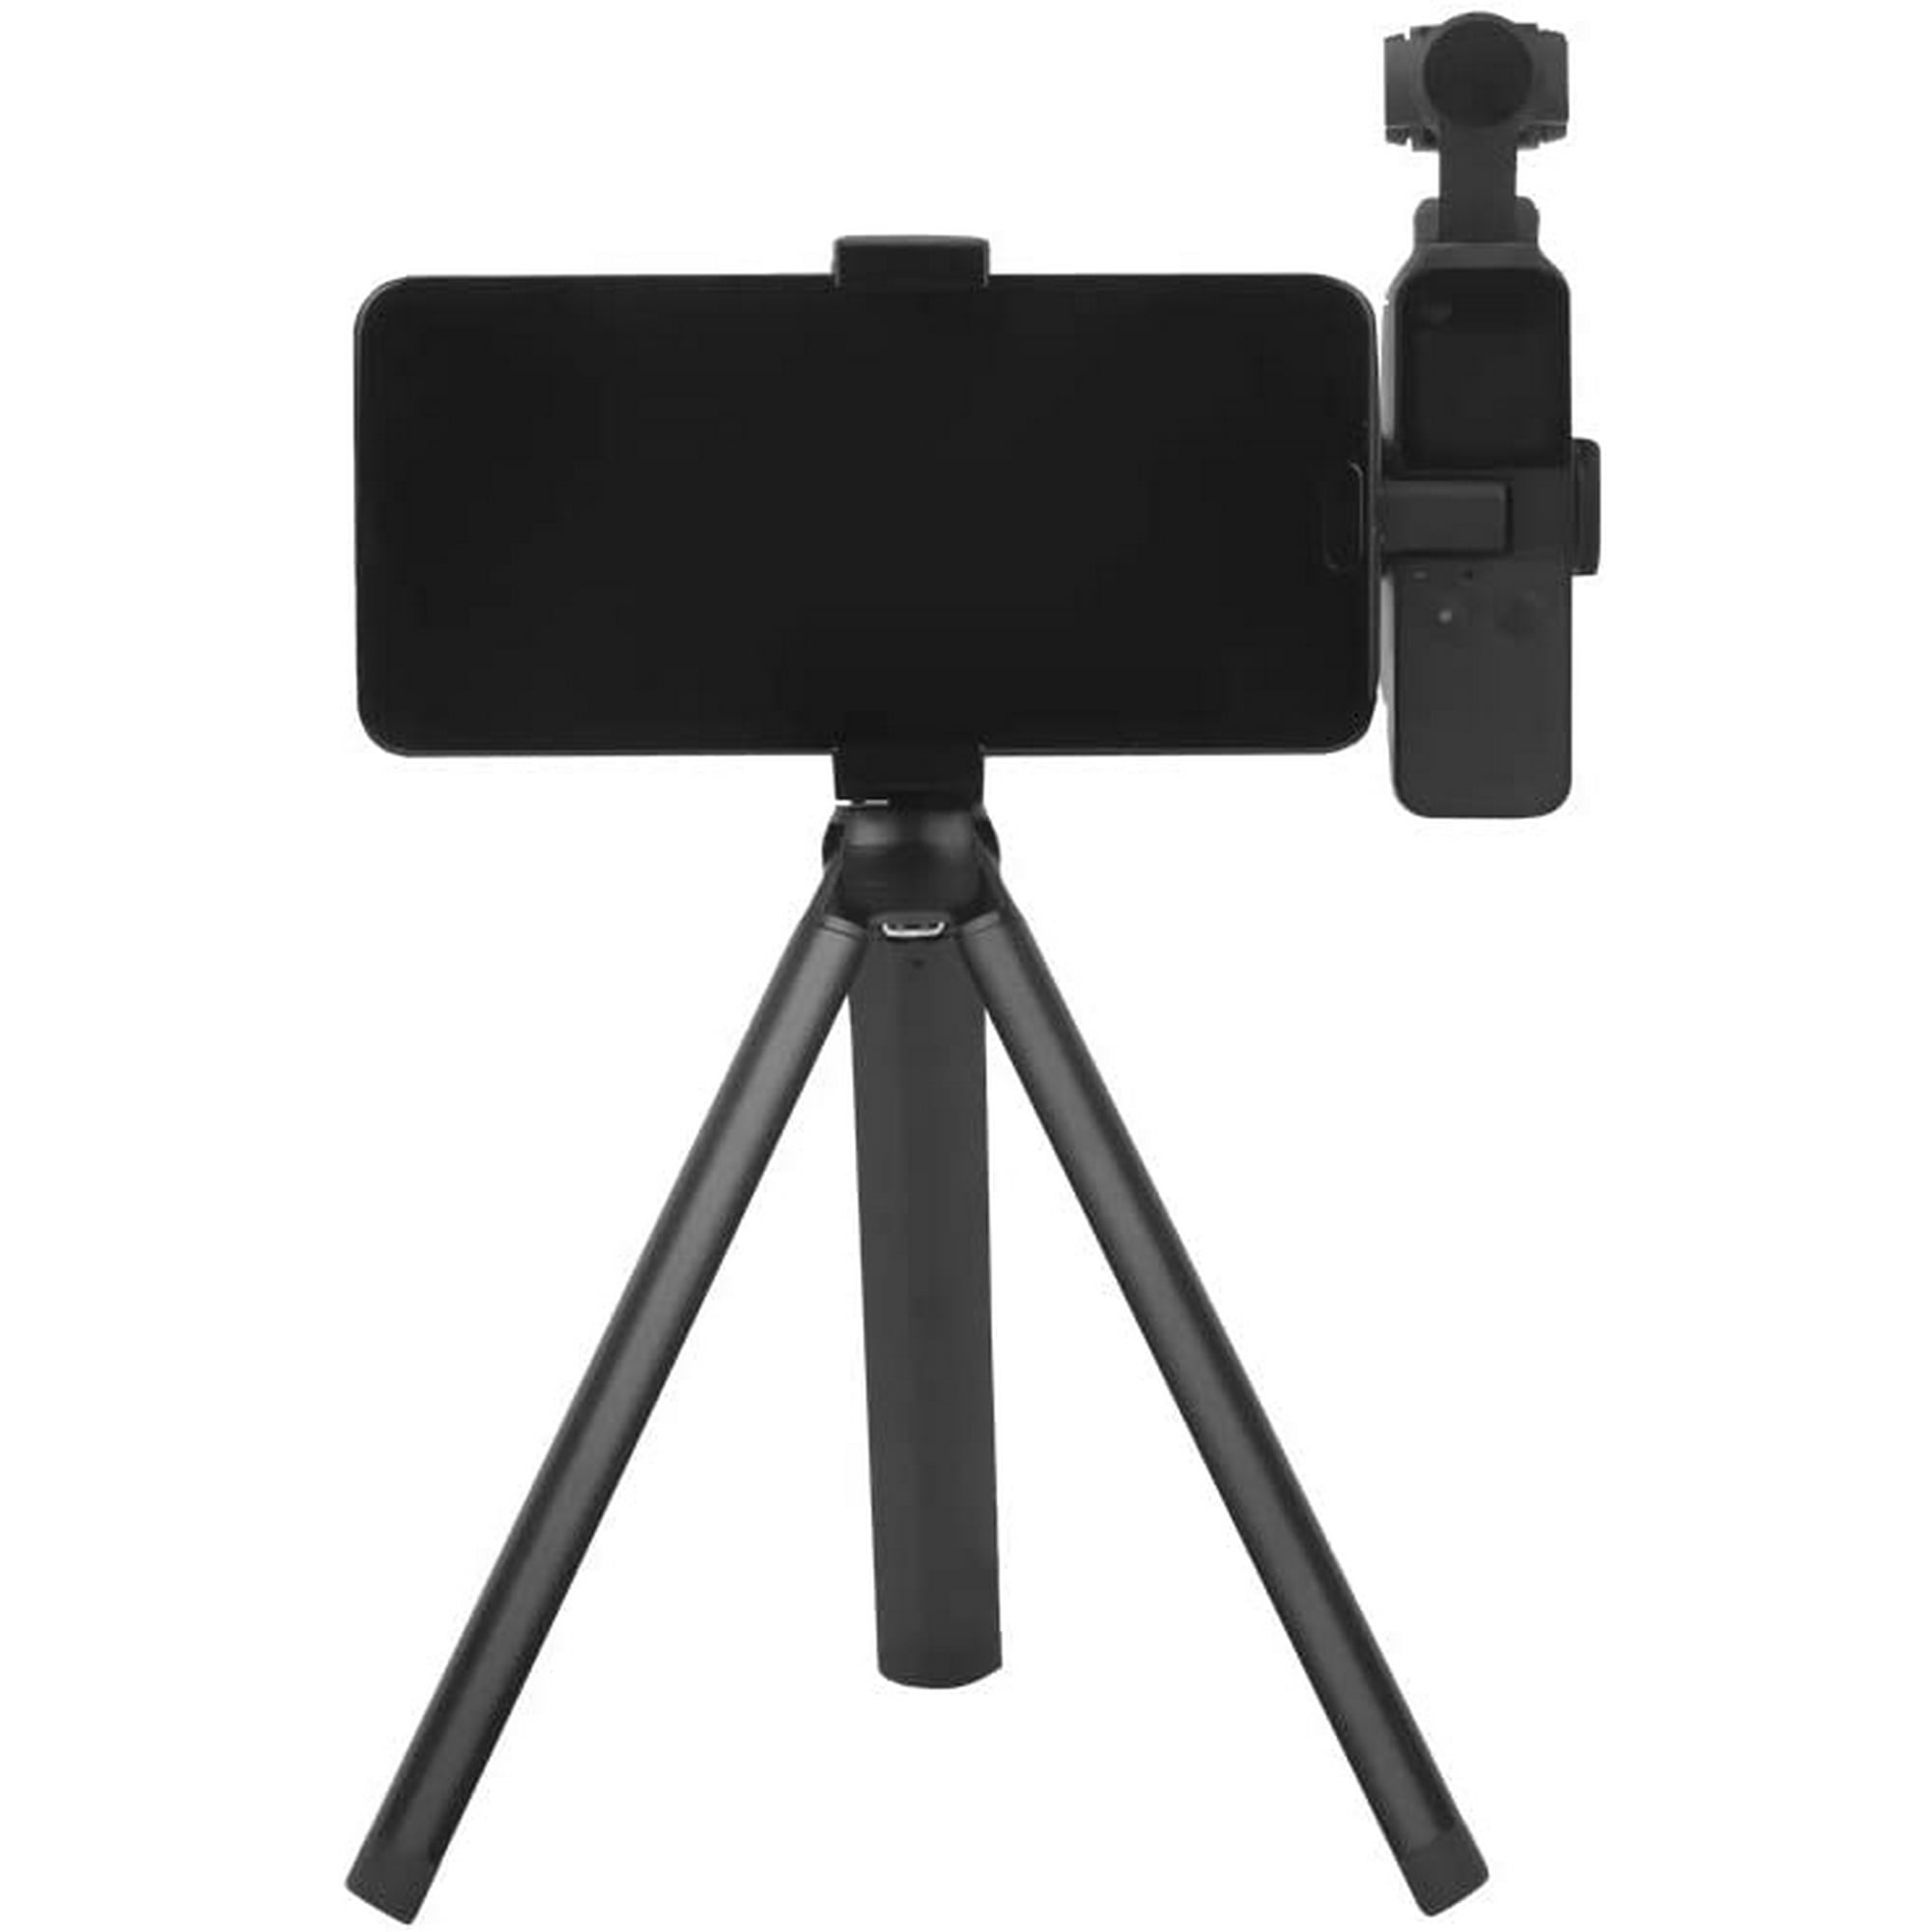 Stand for DJI Osmo,Aluminum Handheld Phone Holder Tripod Mount Stand for DJI Osmo Pocket Accessories 